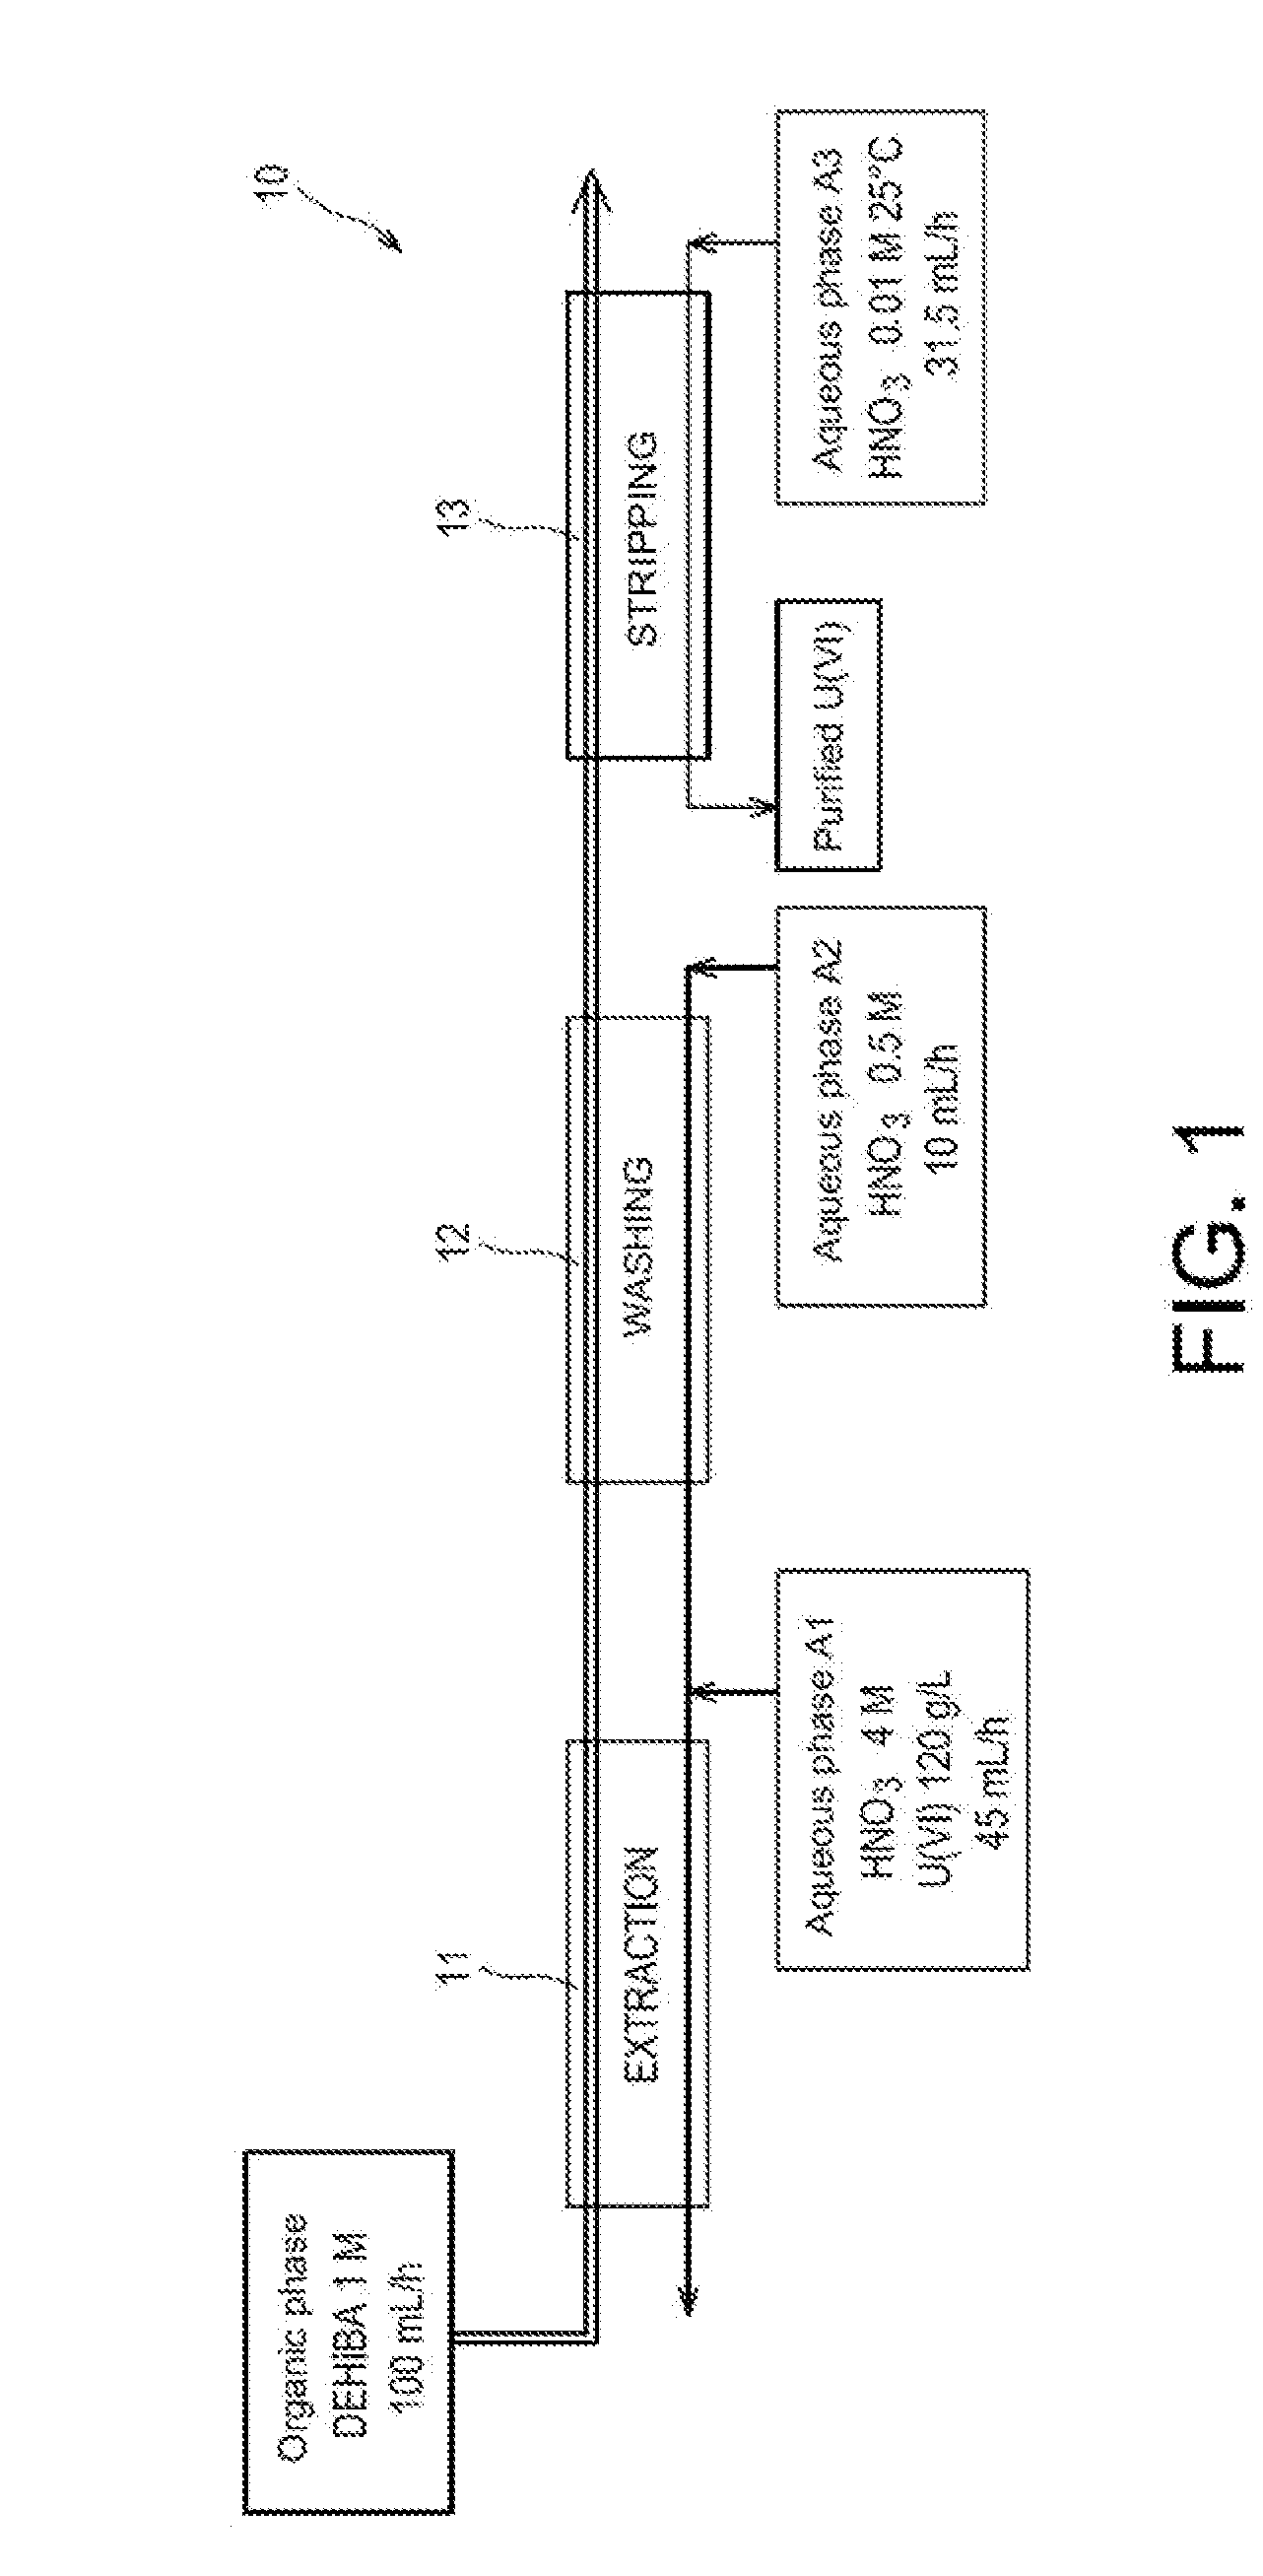 Method for purifying the uranium from a natural uranium concentrate